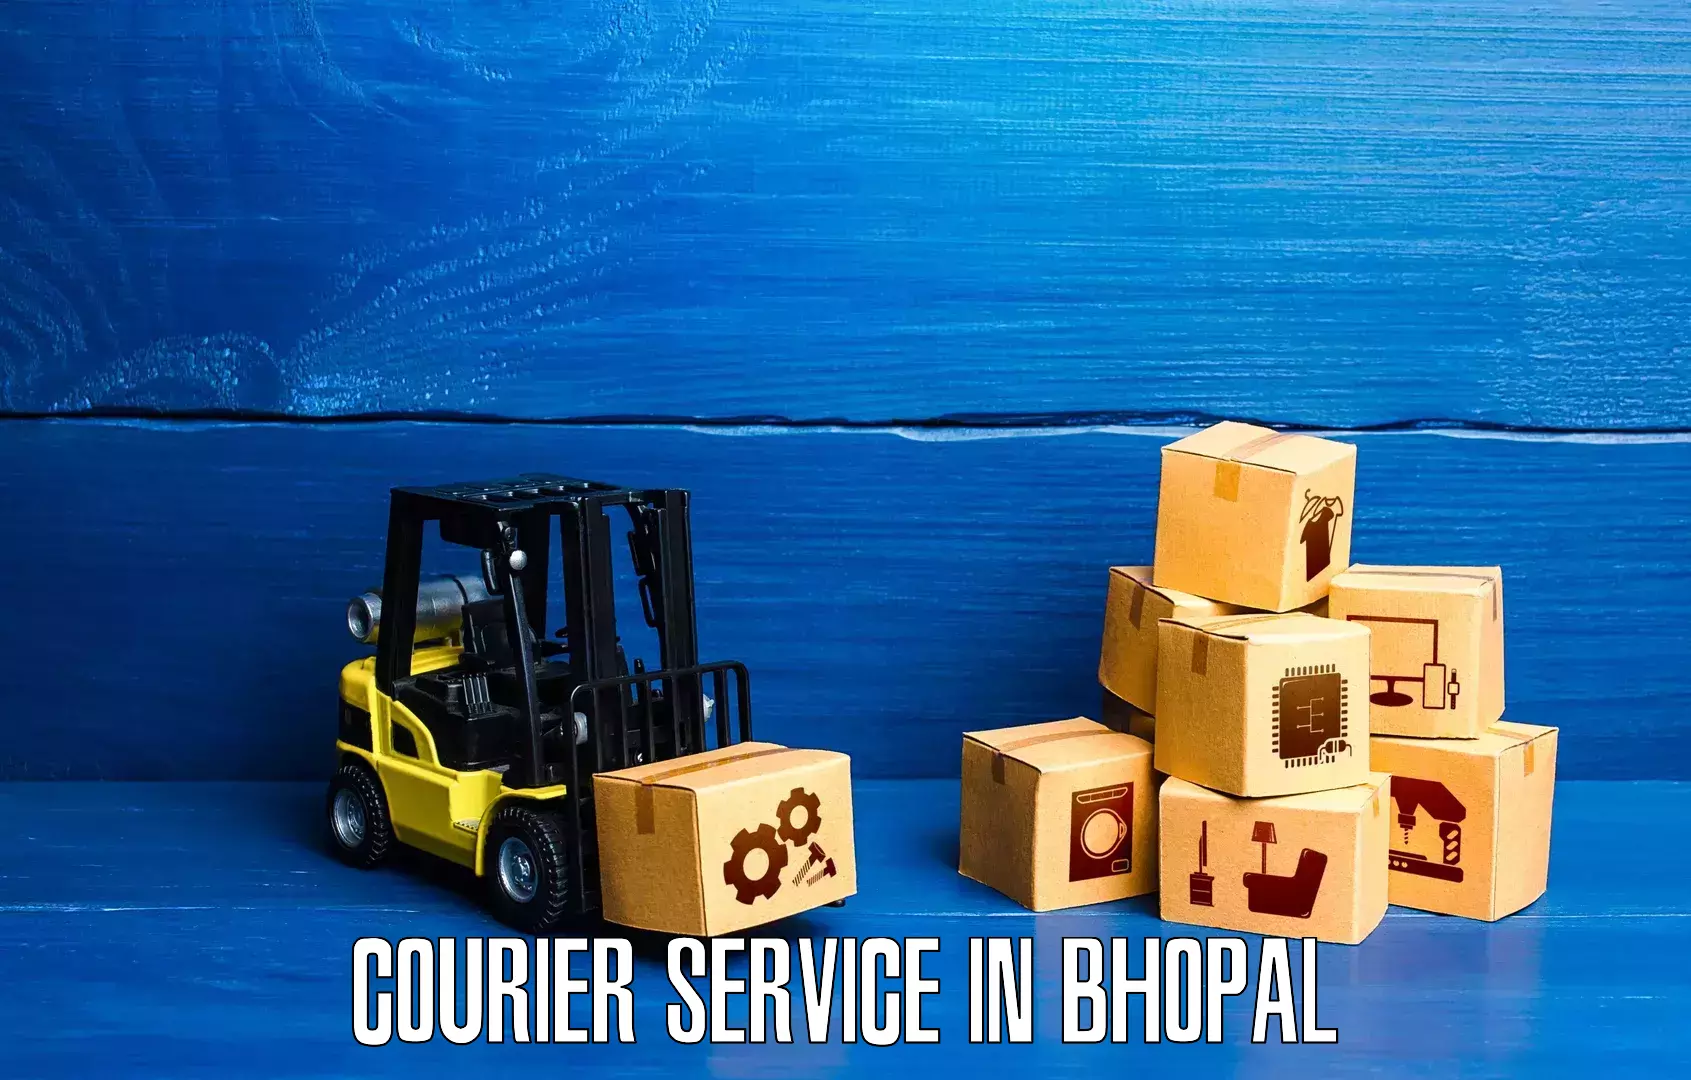 Nationwide parcel services in Bhopal